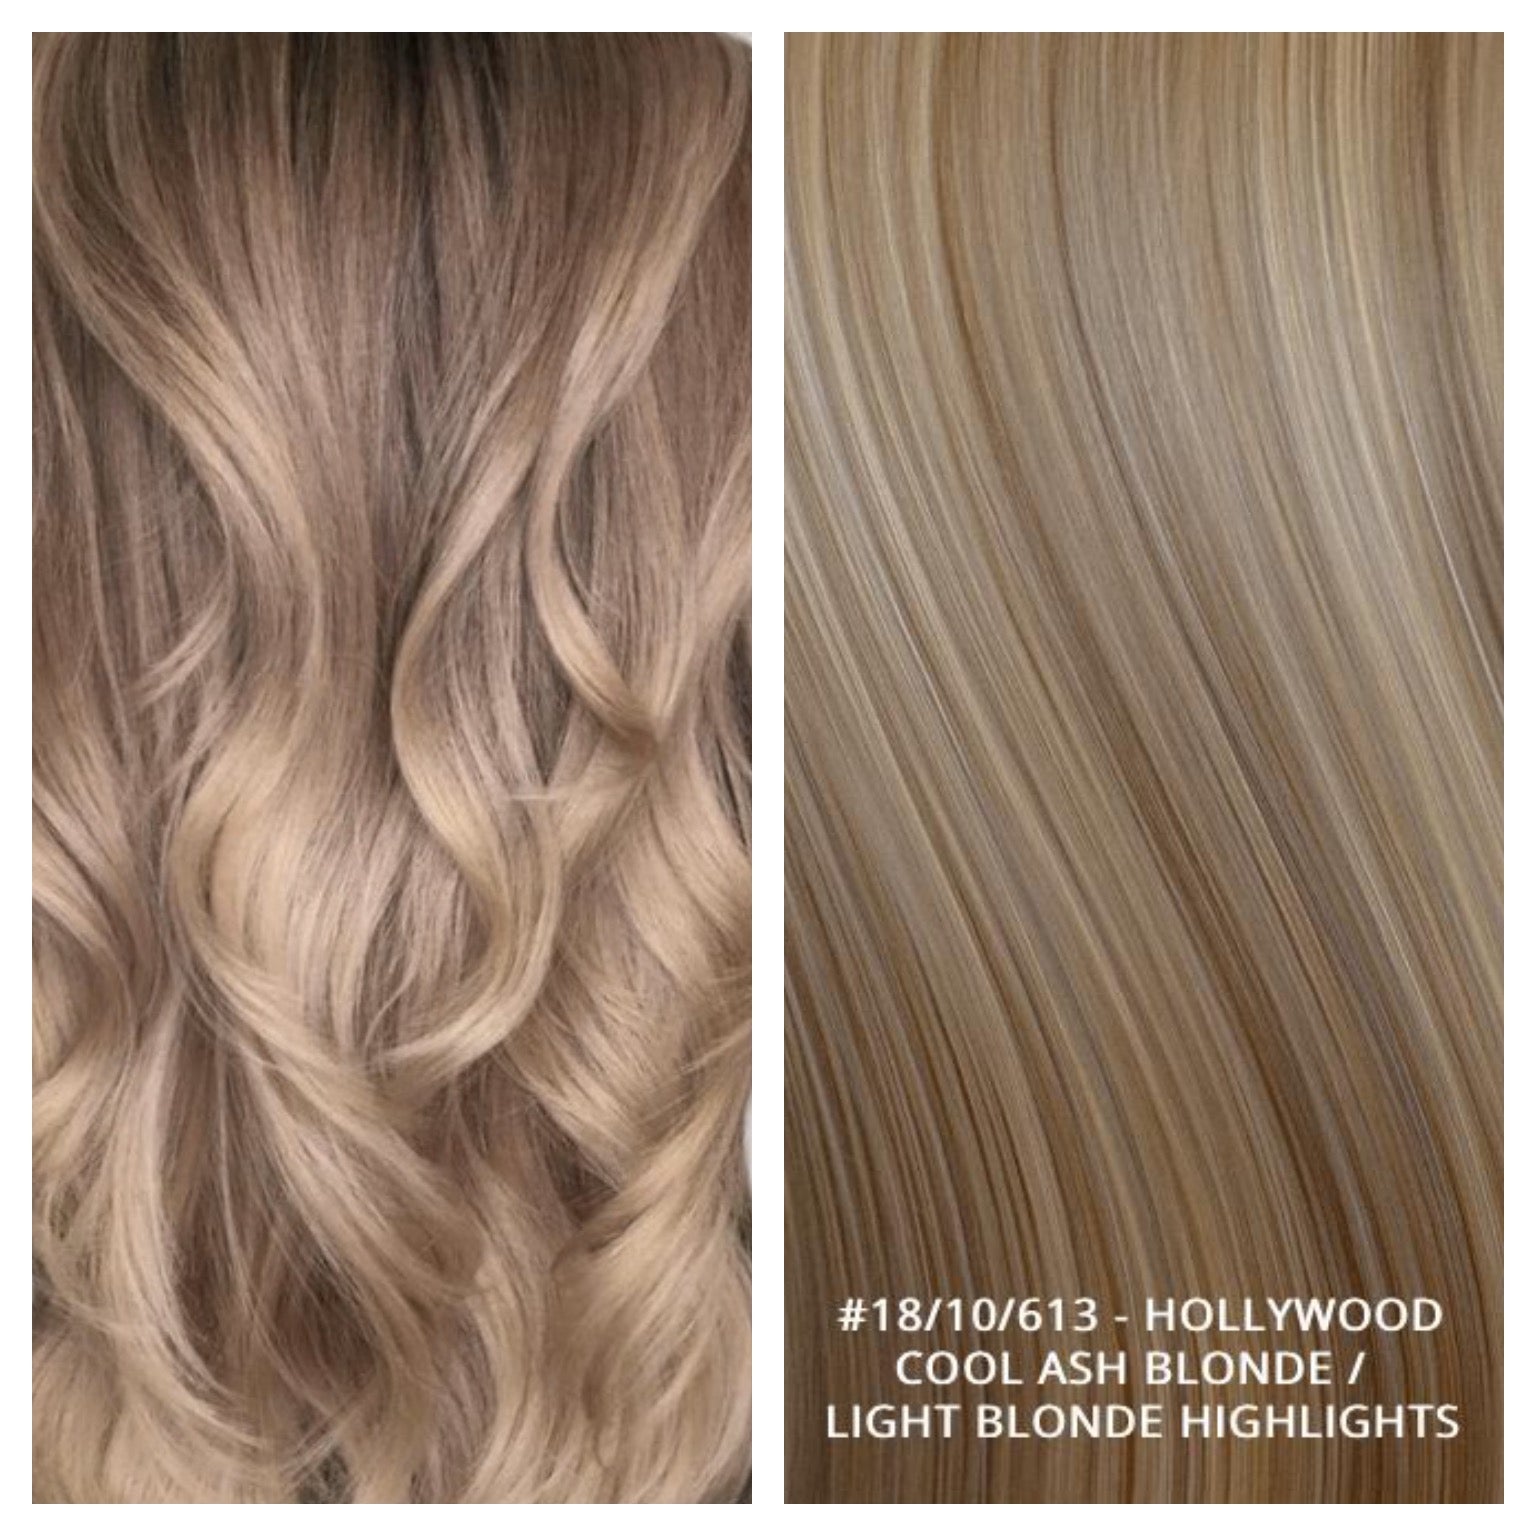 RUSSIAN WEFT WEAVE HAIR EXTENSIONS HIGHLIGHTS #18/10/613 - HOLLYWOOD - COOL ASH BLONDE / LIGHT BLONDE HIGHLIGHTS